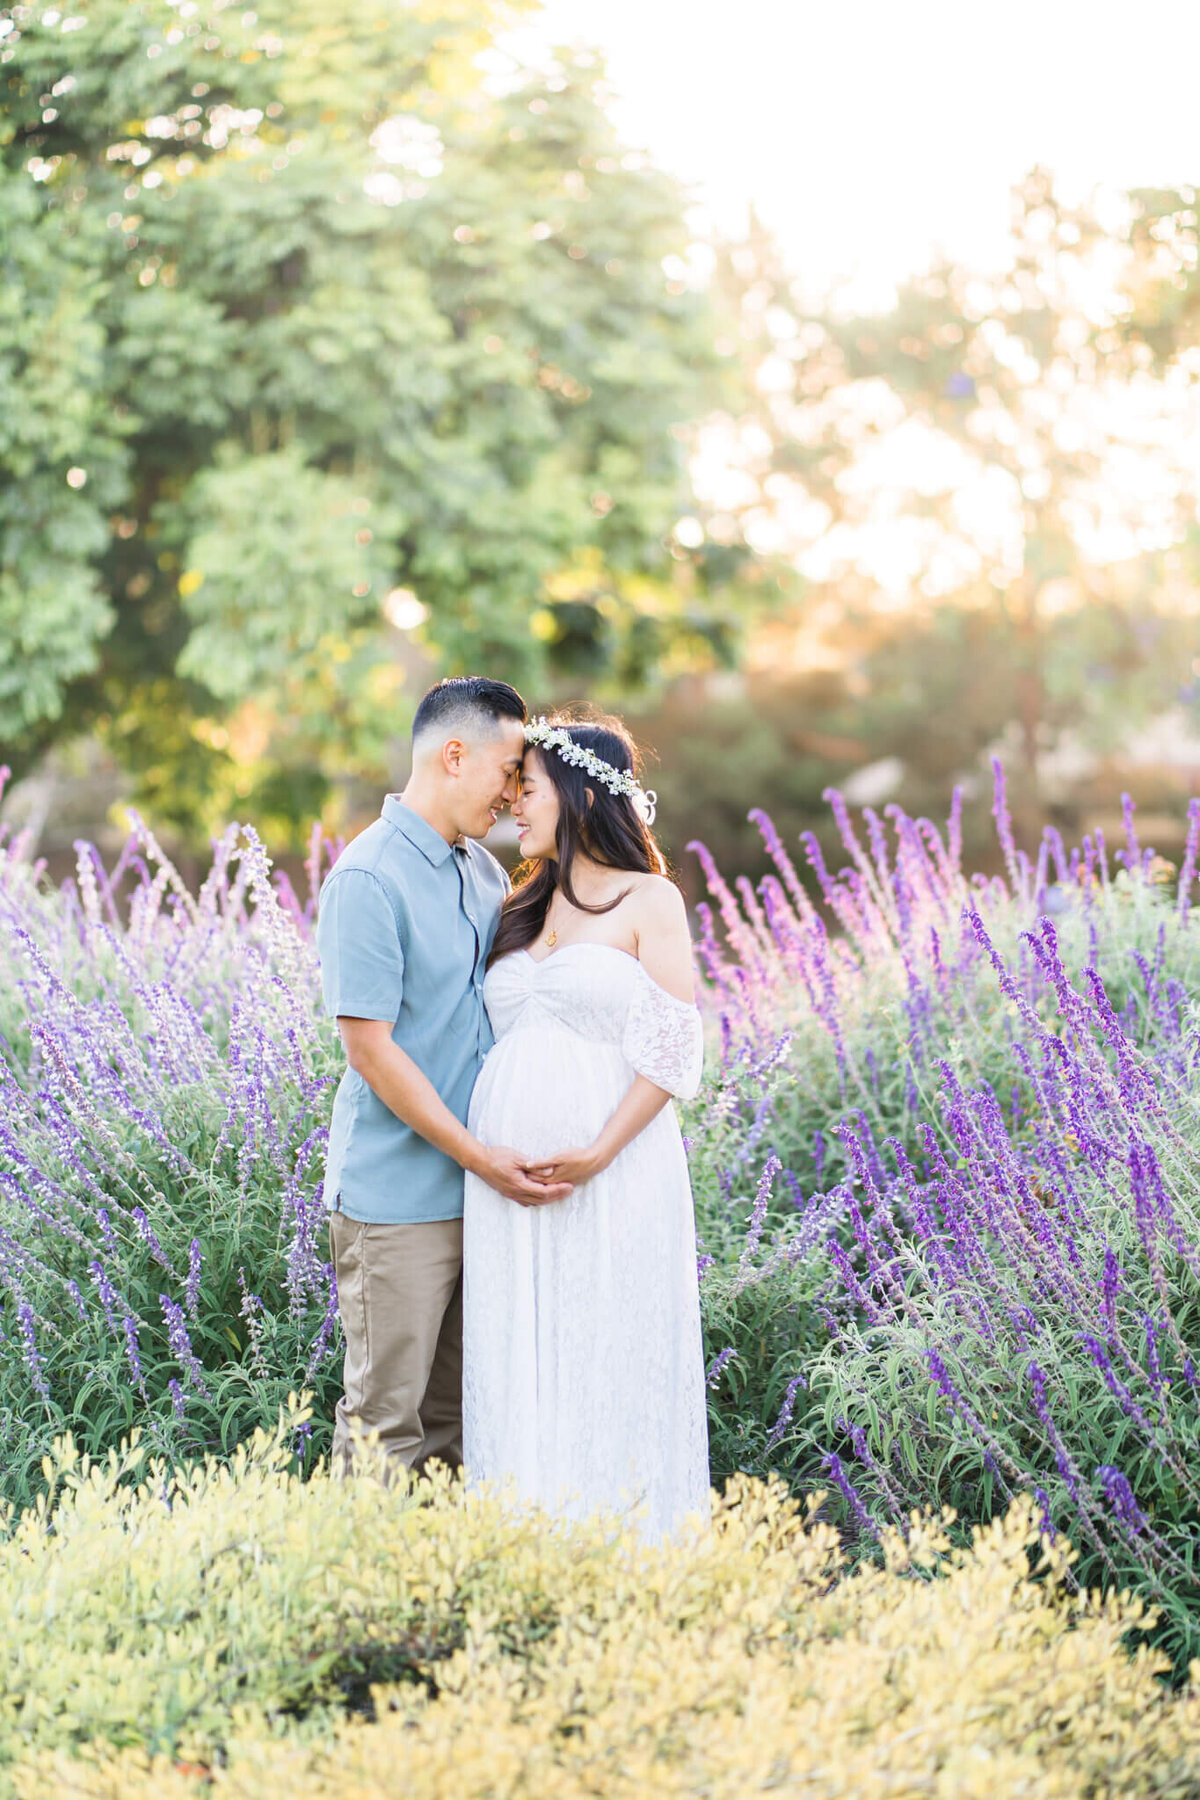 Pregnant couple with white flower wreath standing in a field of purple flowers